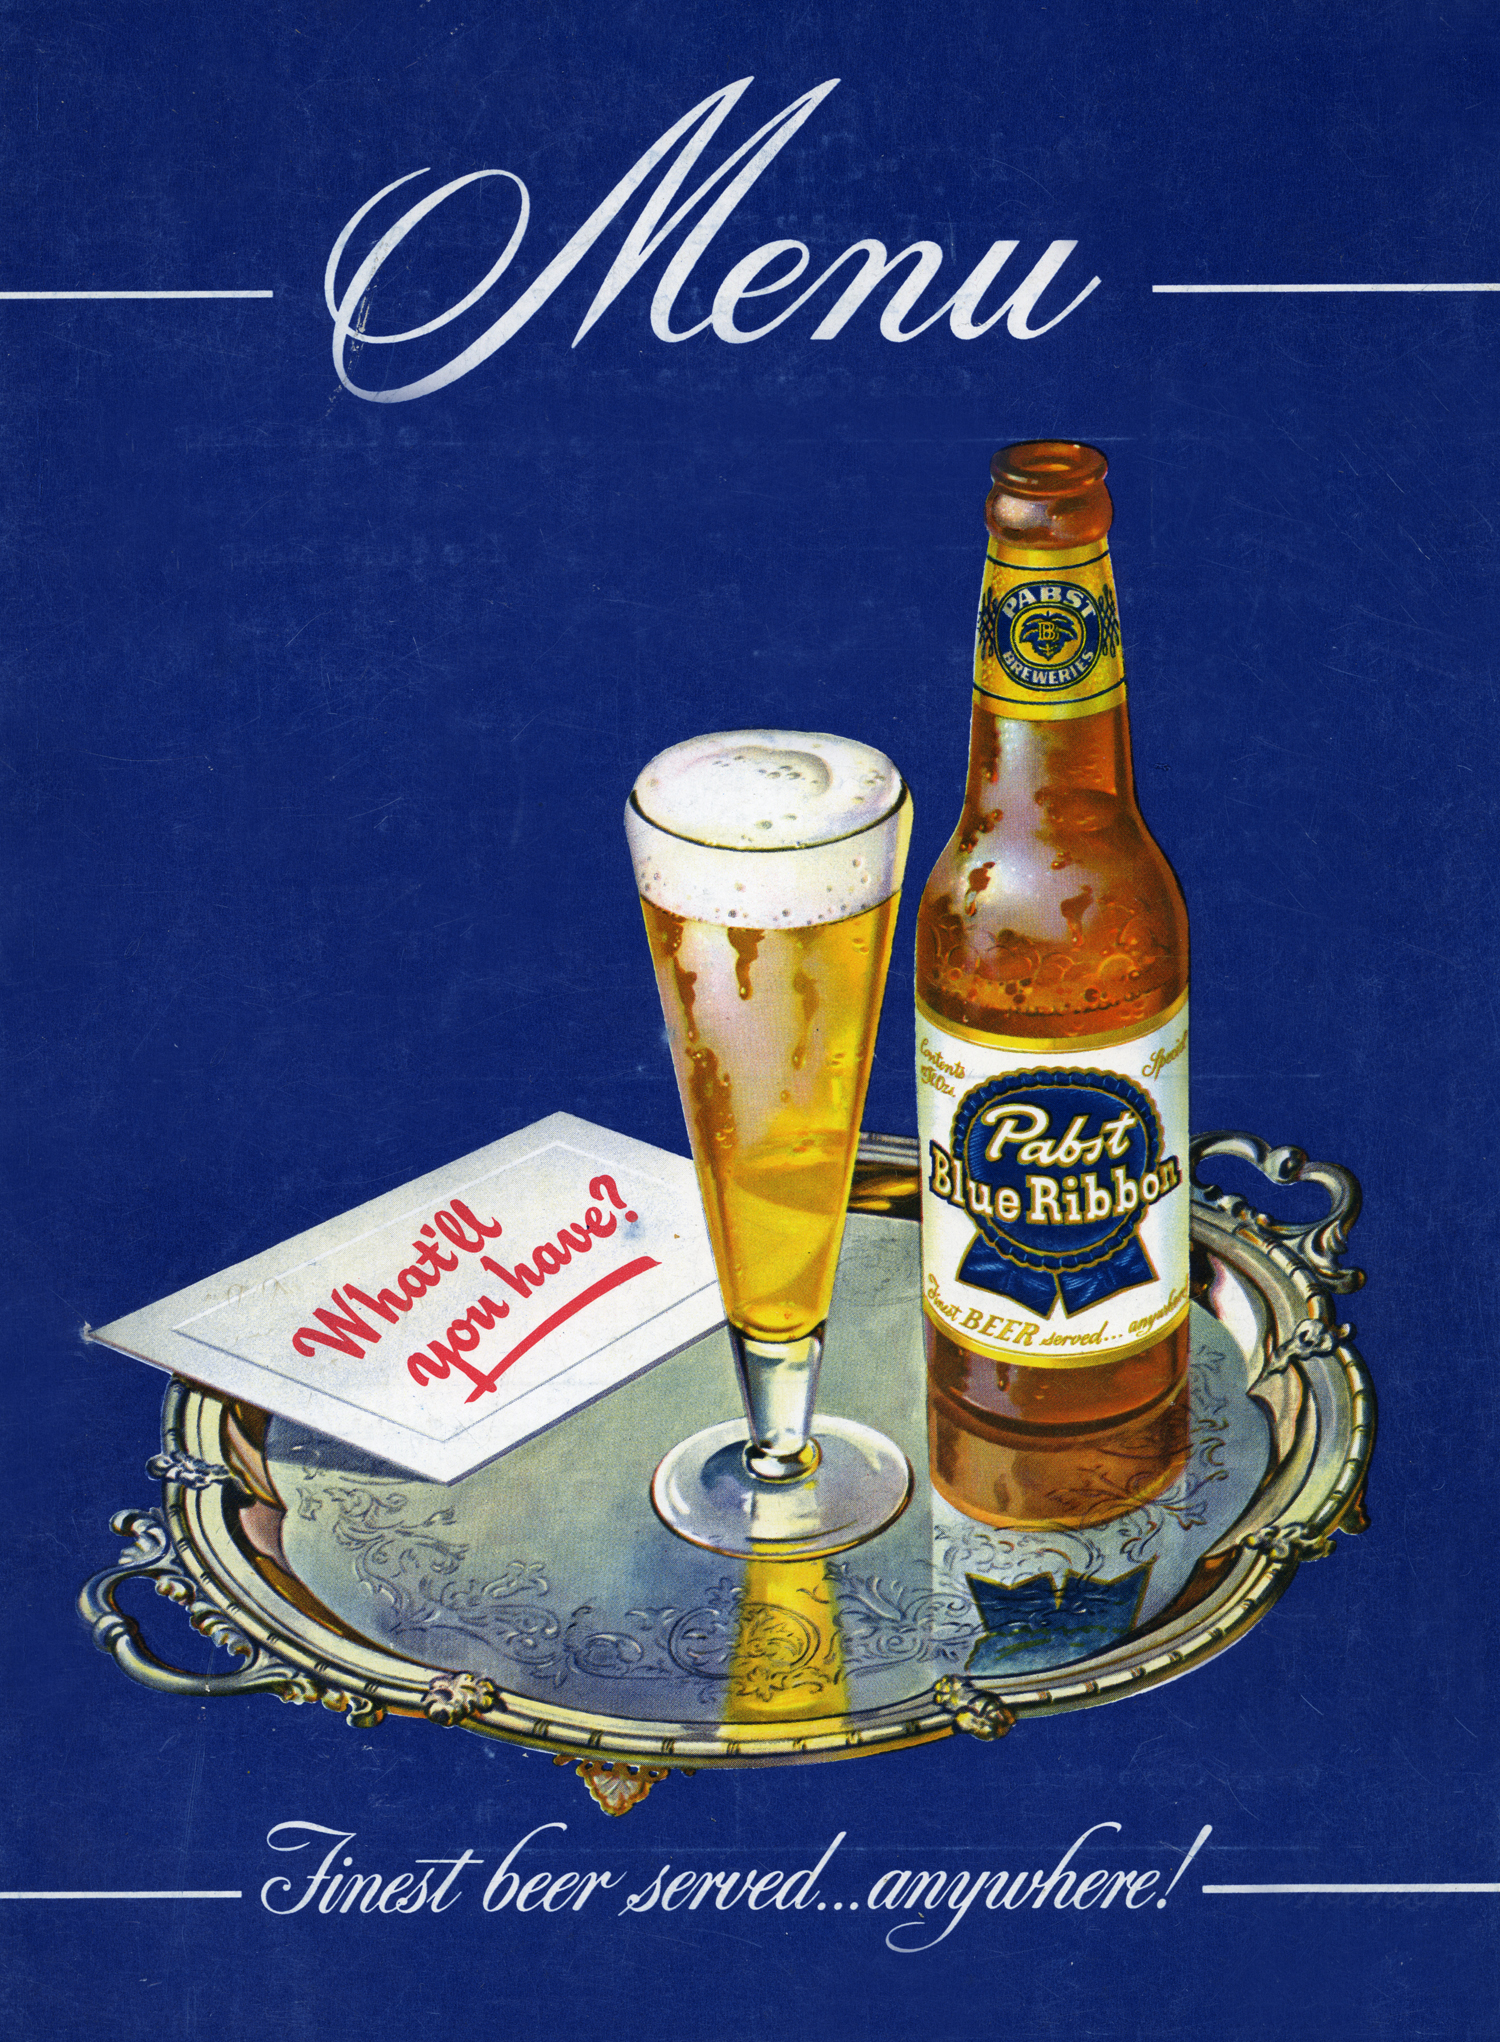 USA - 1949: A menu for Pabst Blue Ribbon reads "Menu, Finest beer served...anywhere!" from 1949 in USA.  (Photo by Jim Heimann Collection/Getty Images) (Jim Heimann Collection — Getty Images)